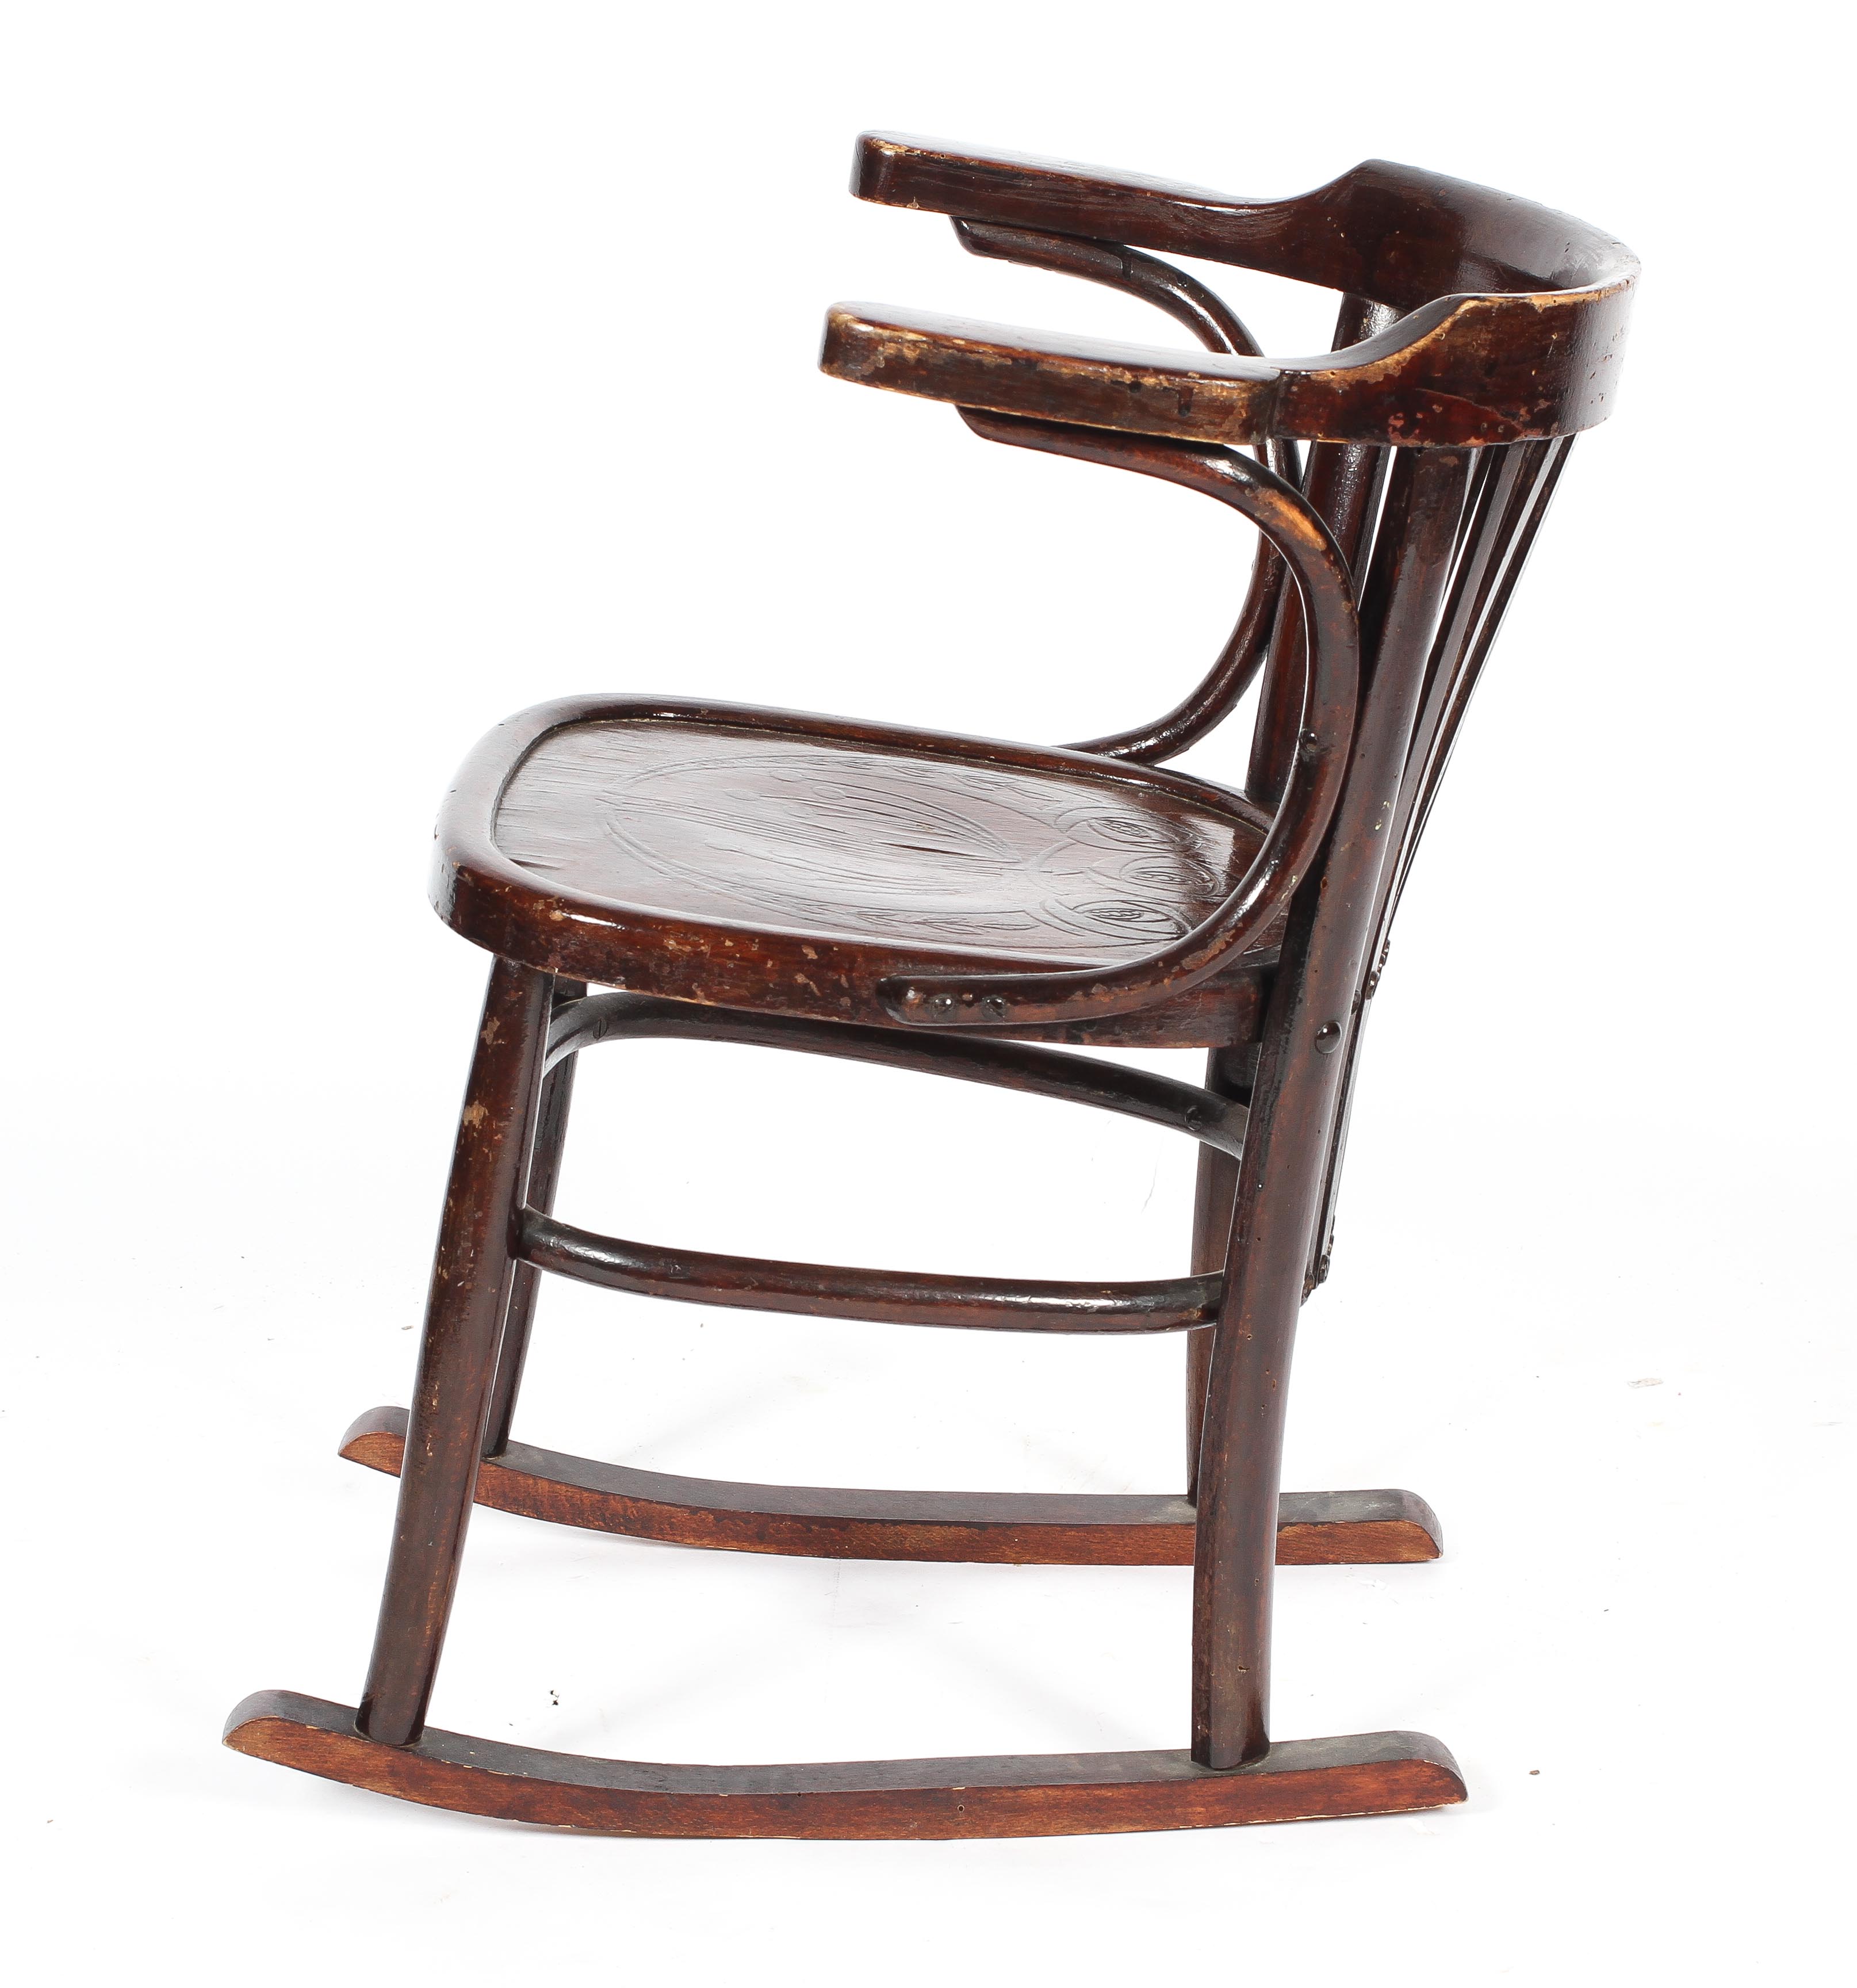 An Art Nouveau style bentwood rocking chair, - Image 2 of 2